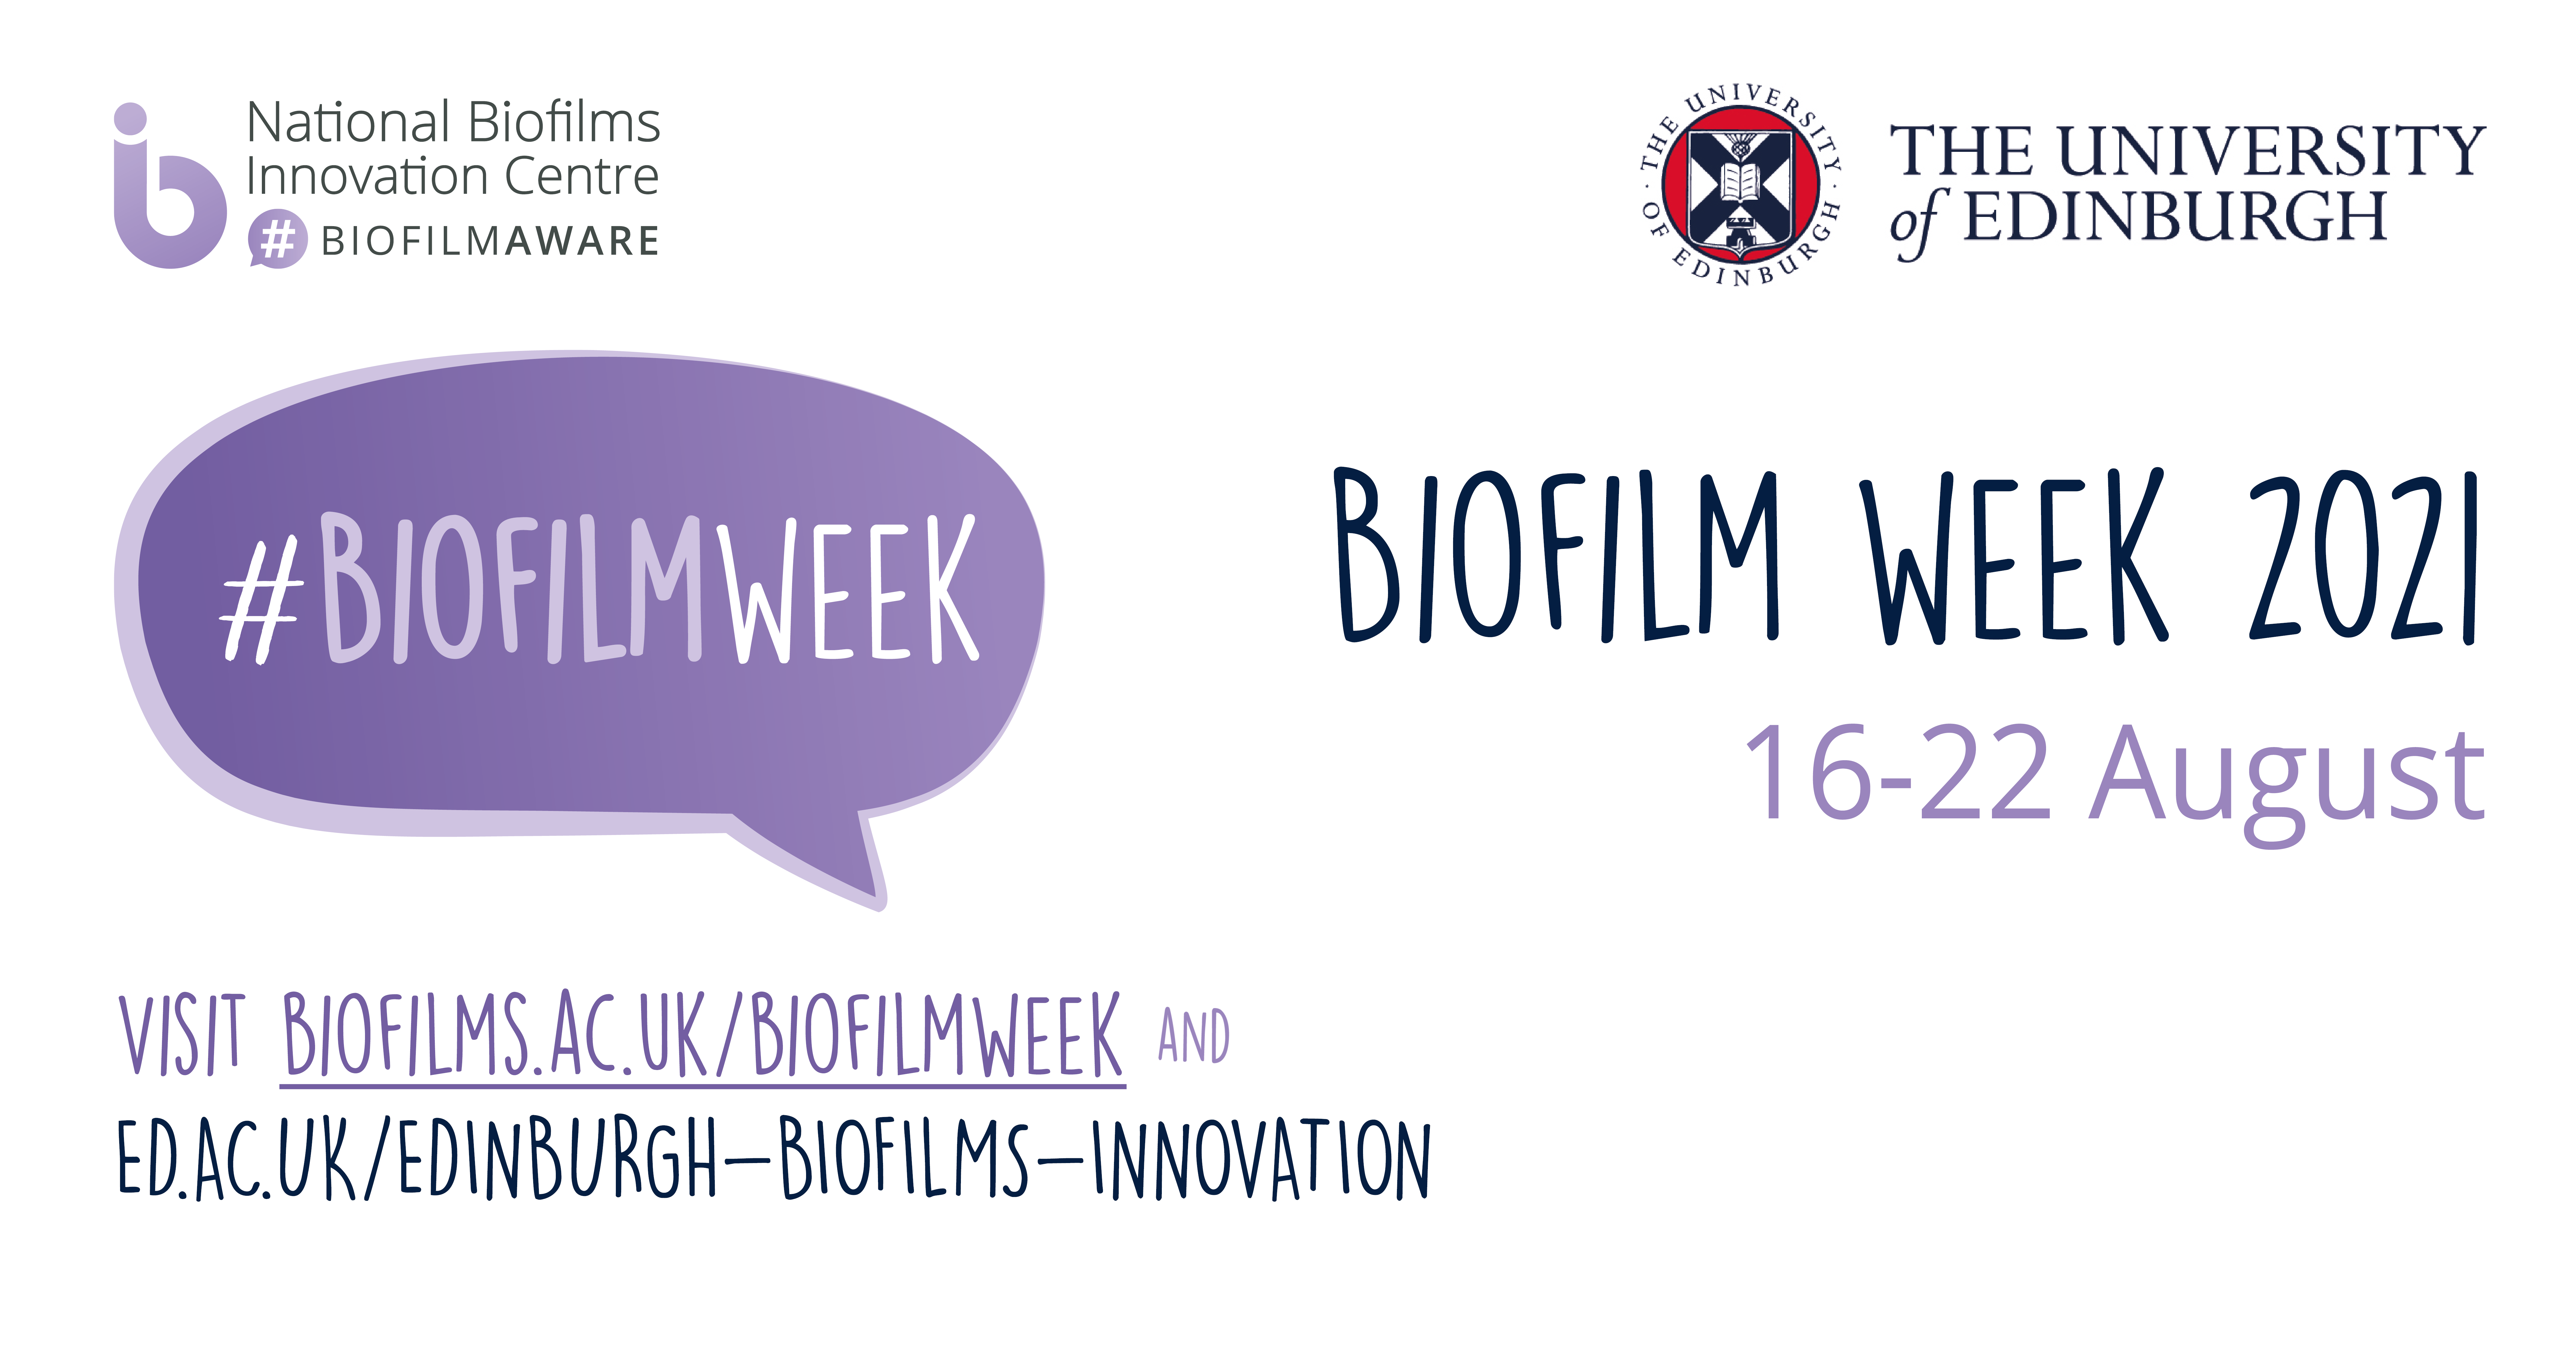 image of BiofilmWeek with the dates 16-22 August